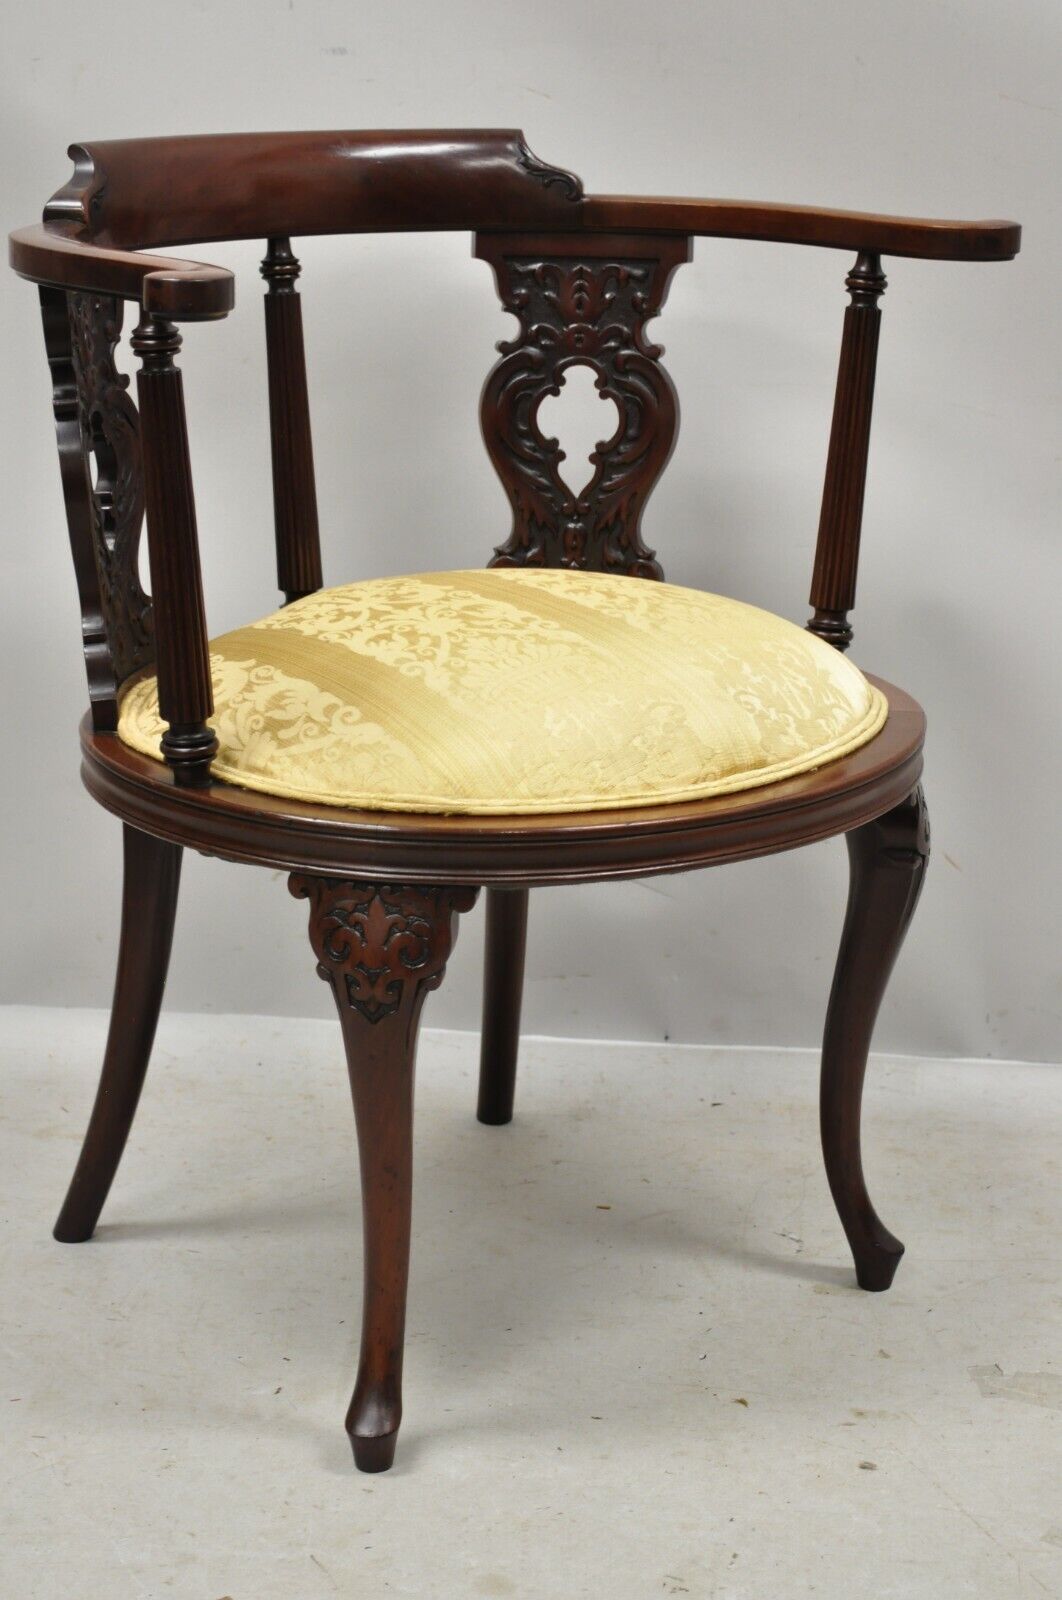 Antique Victorian French Style Mahogany Vanity Accent Side Chair with Round Seat